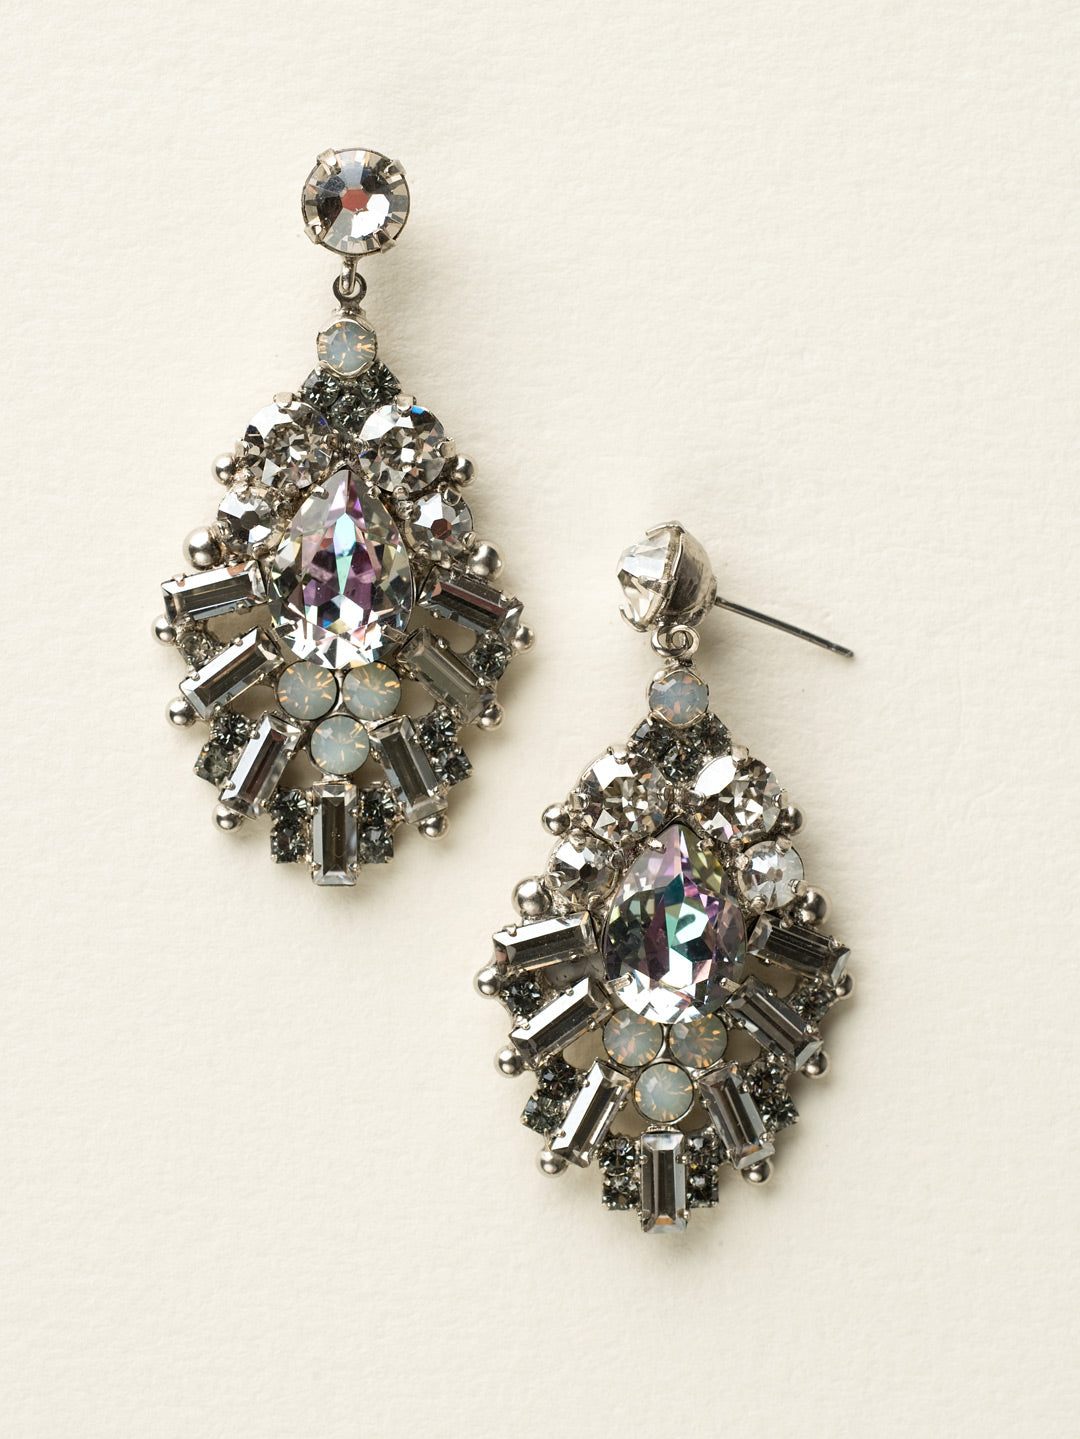 Multi-Cut Crystal Statement Earring Post Earrings - ECR54ASPUL - What a show-stopper! Wear these bursting baubles proudly for a night out on the town. From Sorrelli's Purple Lotus collection in our Antique Silver-tone finish.